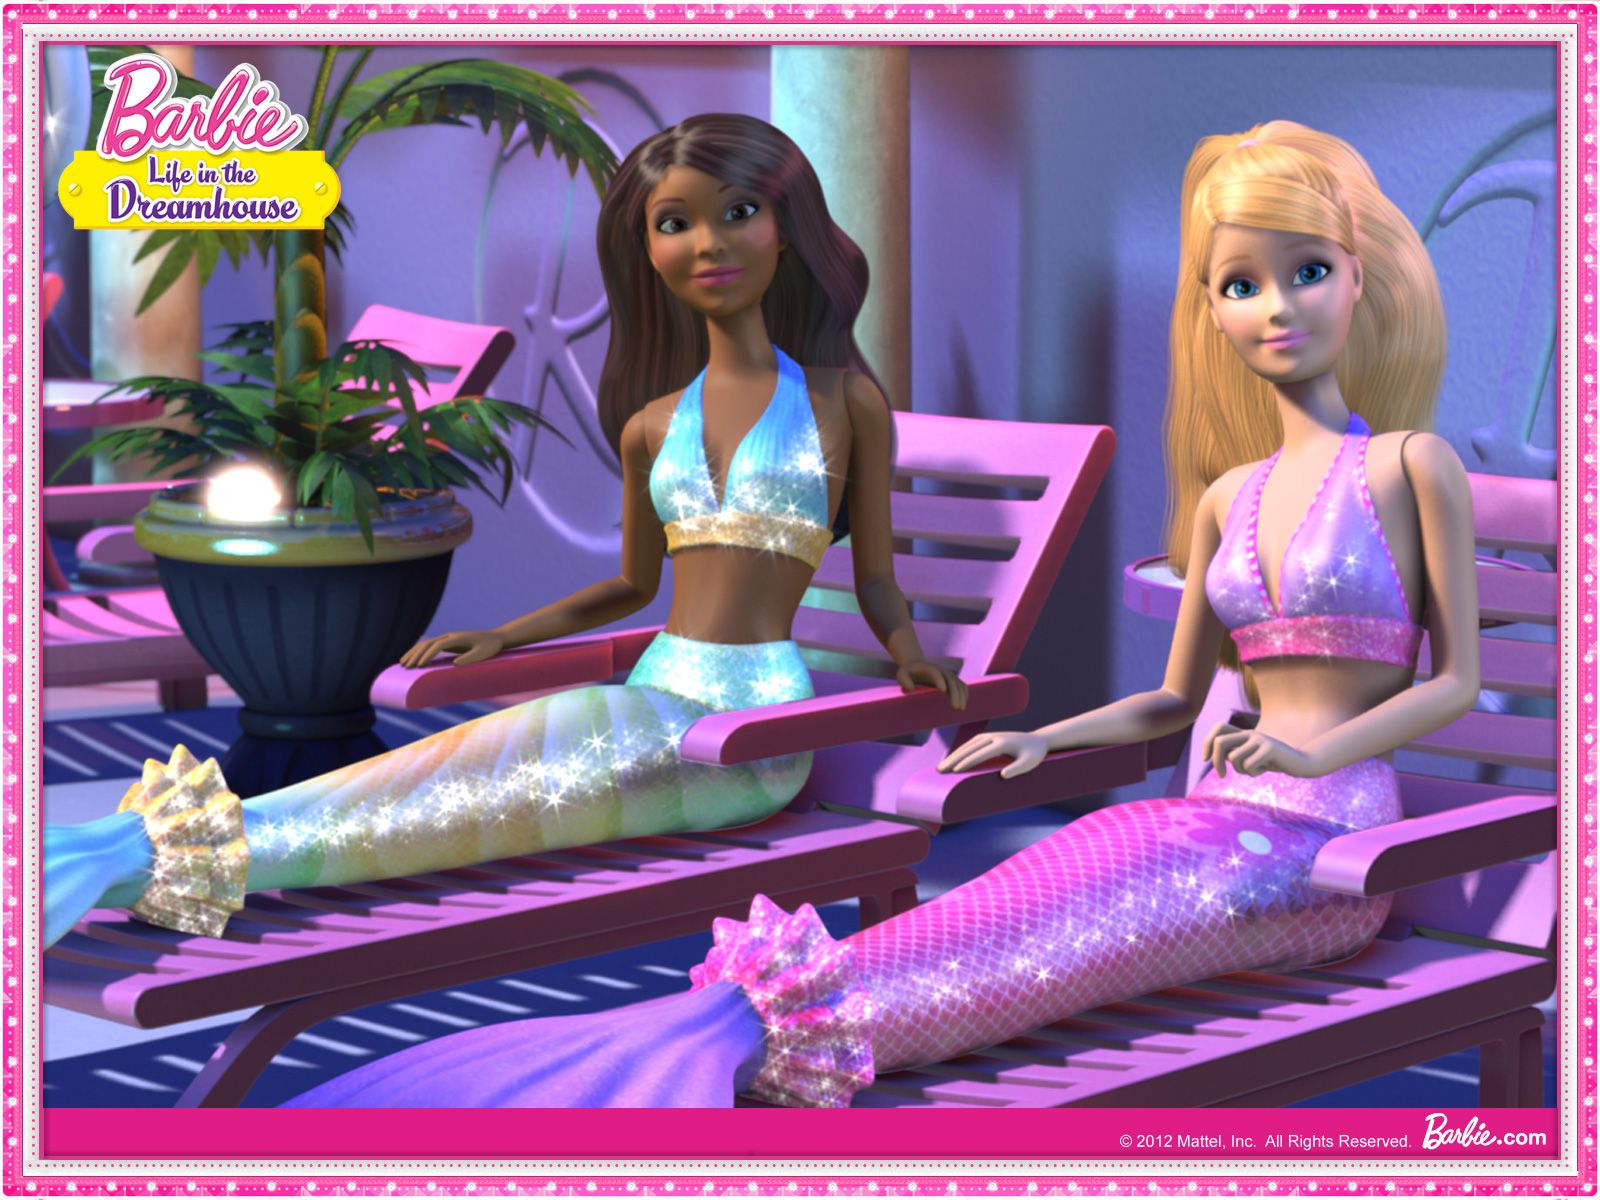 Barbie: Life in the Dreamhouse Wallpaper: Barbie Life In The Dream House. Mermaid barbie, Barbie life, Barbie image